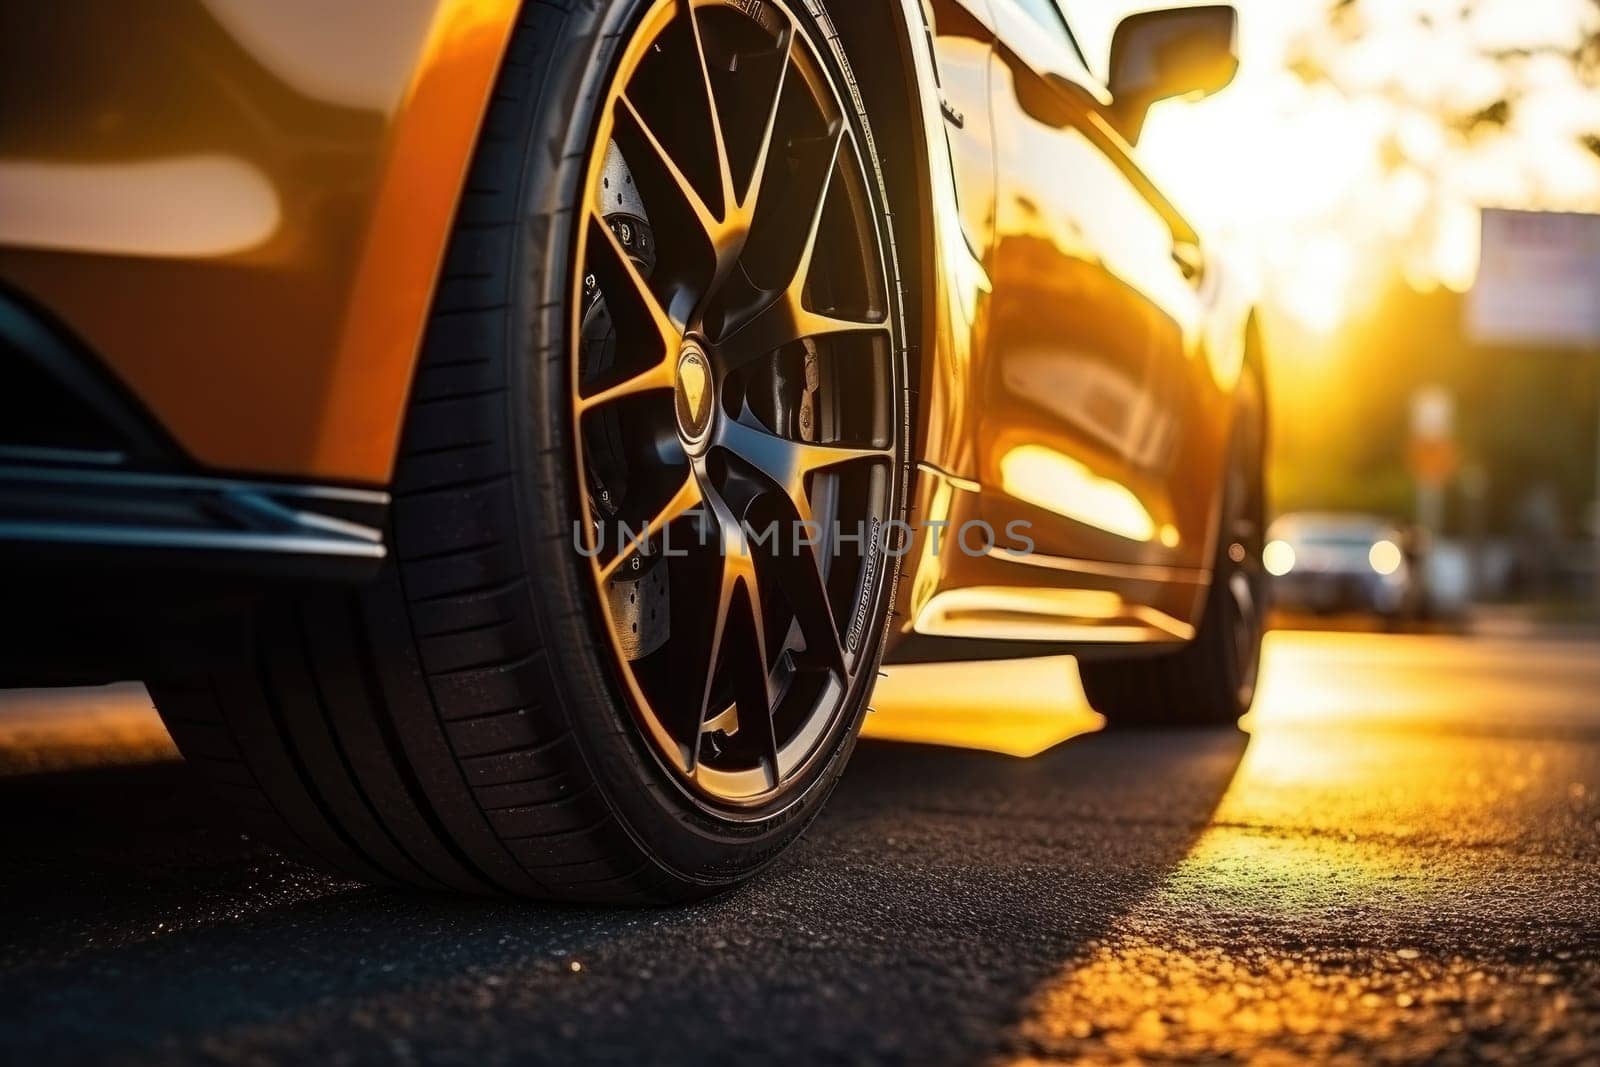 close up sport car photography capturing motion blur, reflections, close up view of a car wheel. by Chawagen